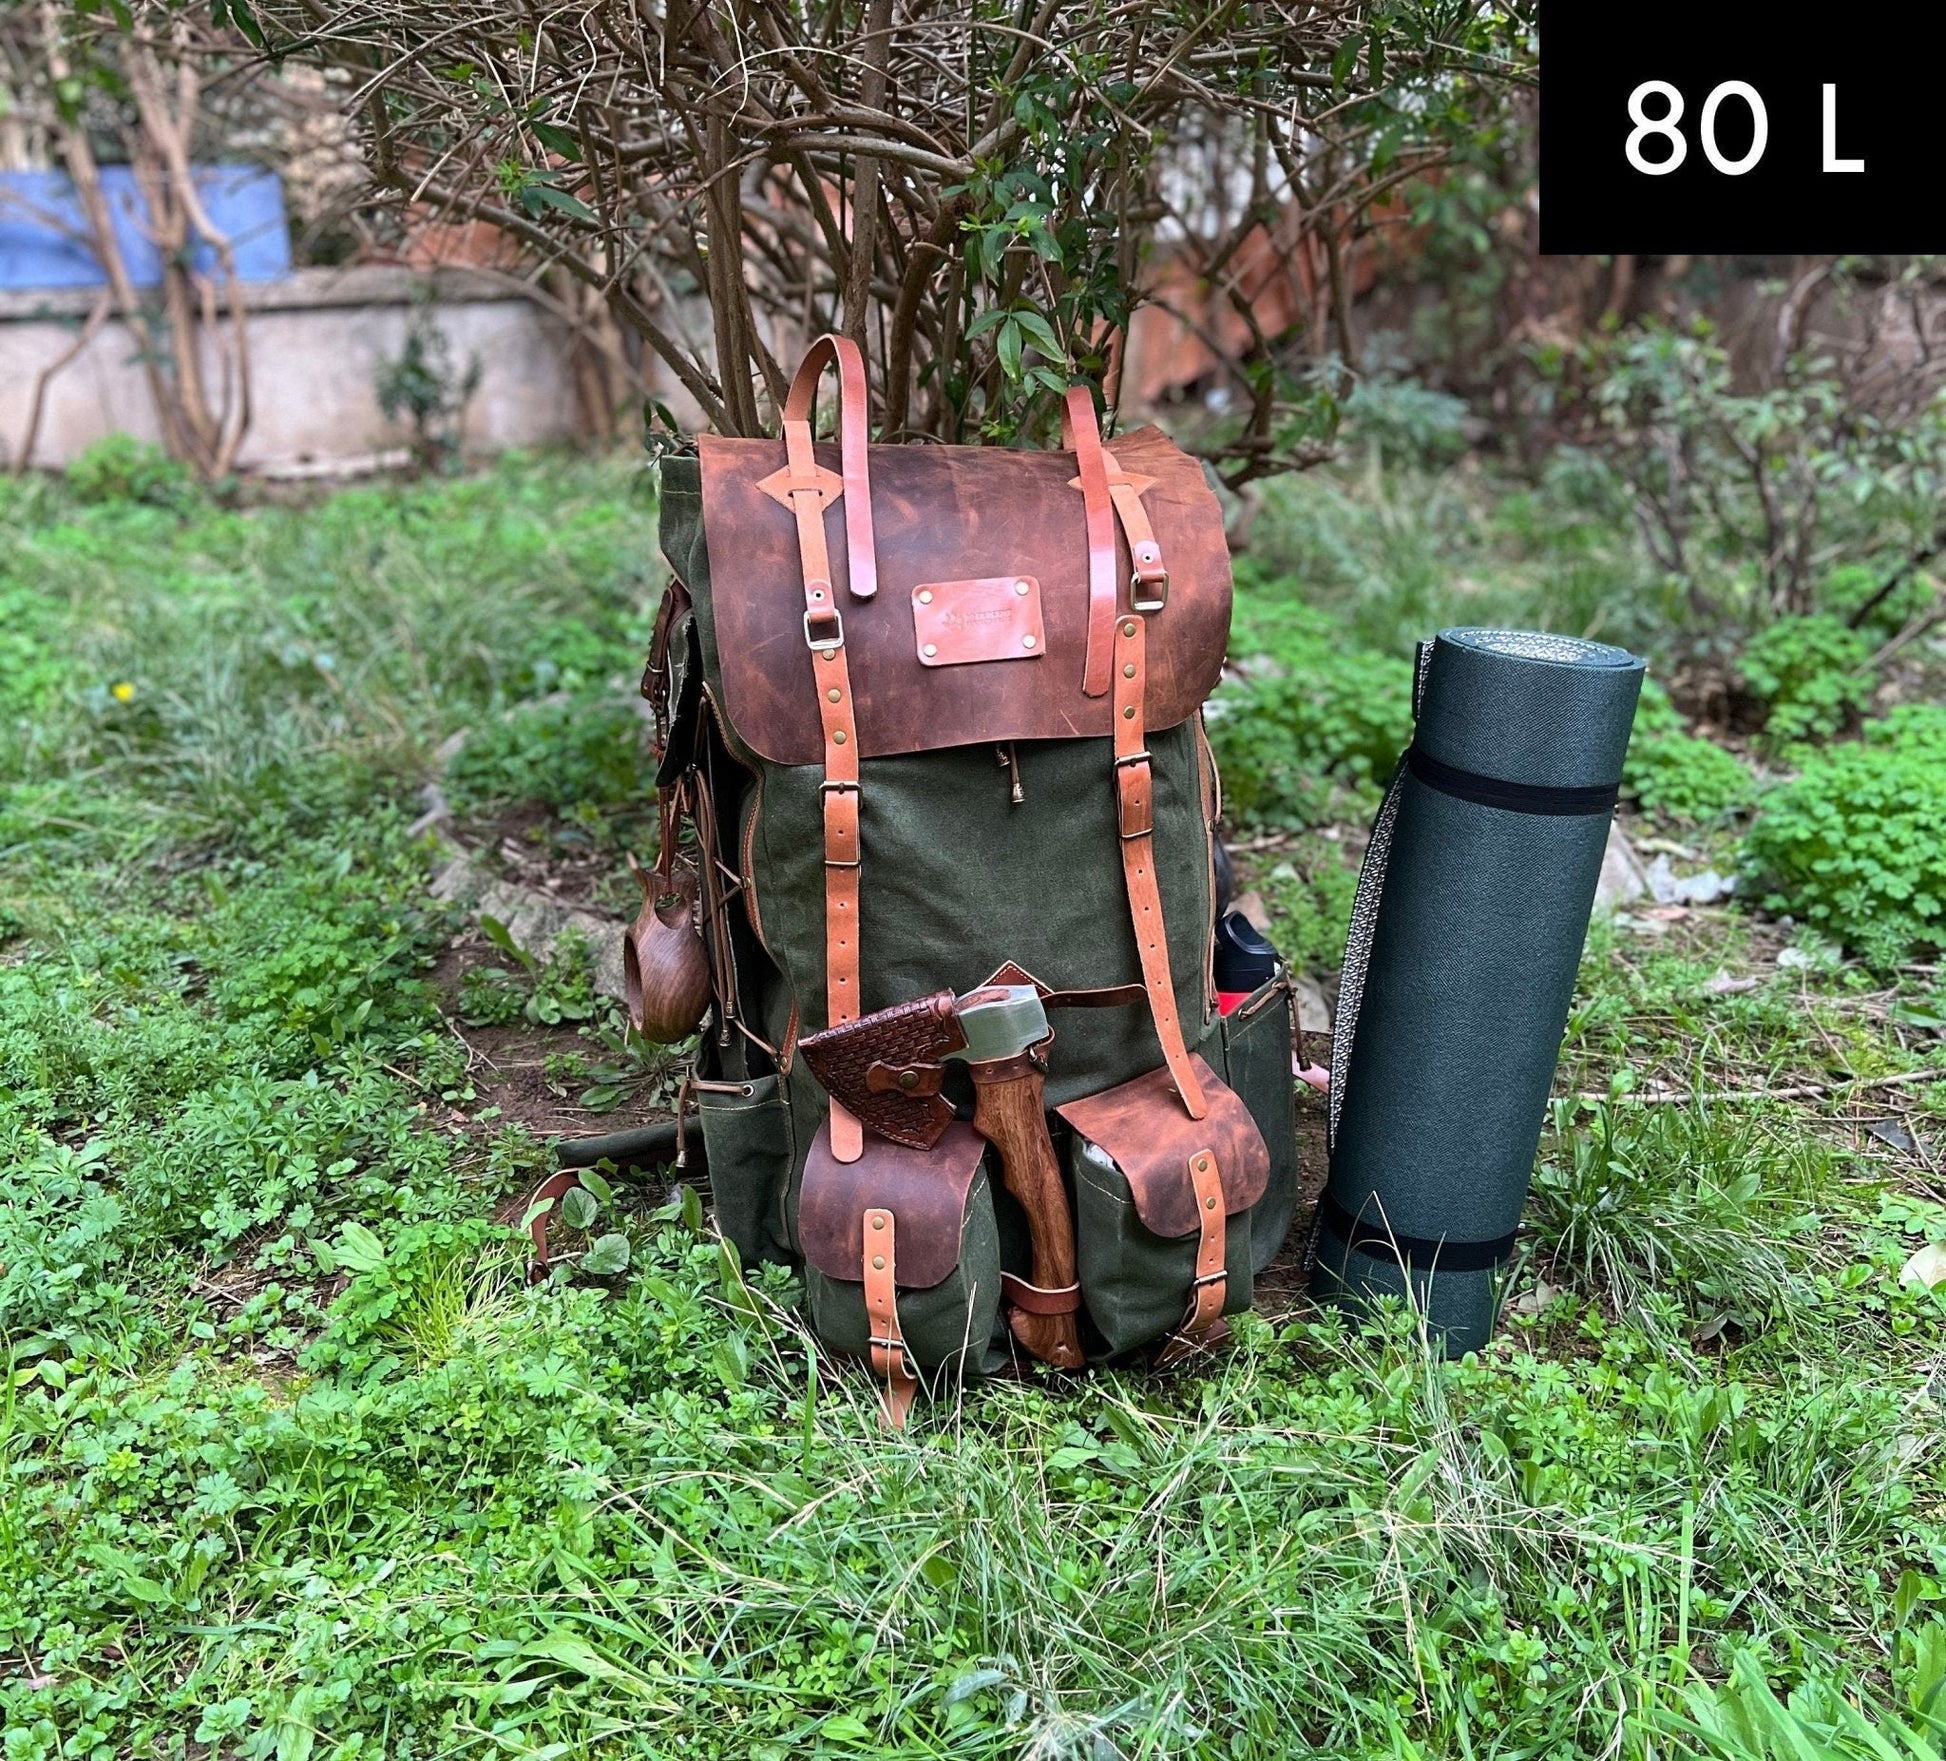 For Andre, 30 Liter to 80 Liter Bushcraft Backpack  Camping Backpack Hiking backpack Canvas Leather Backpack with Black-Brown-Green options  99percenthandmade   